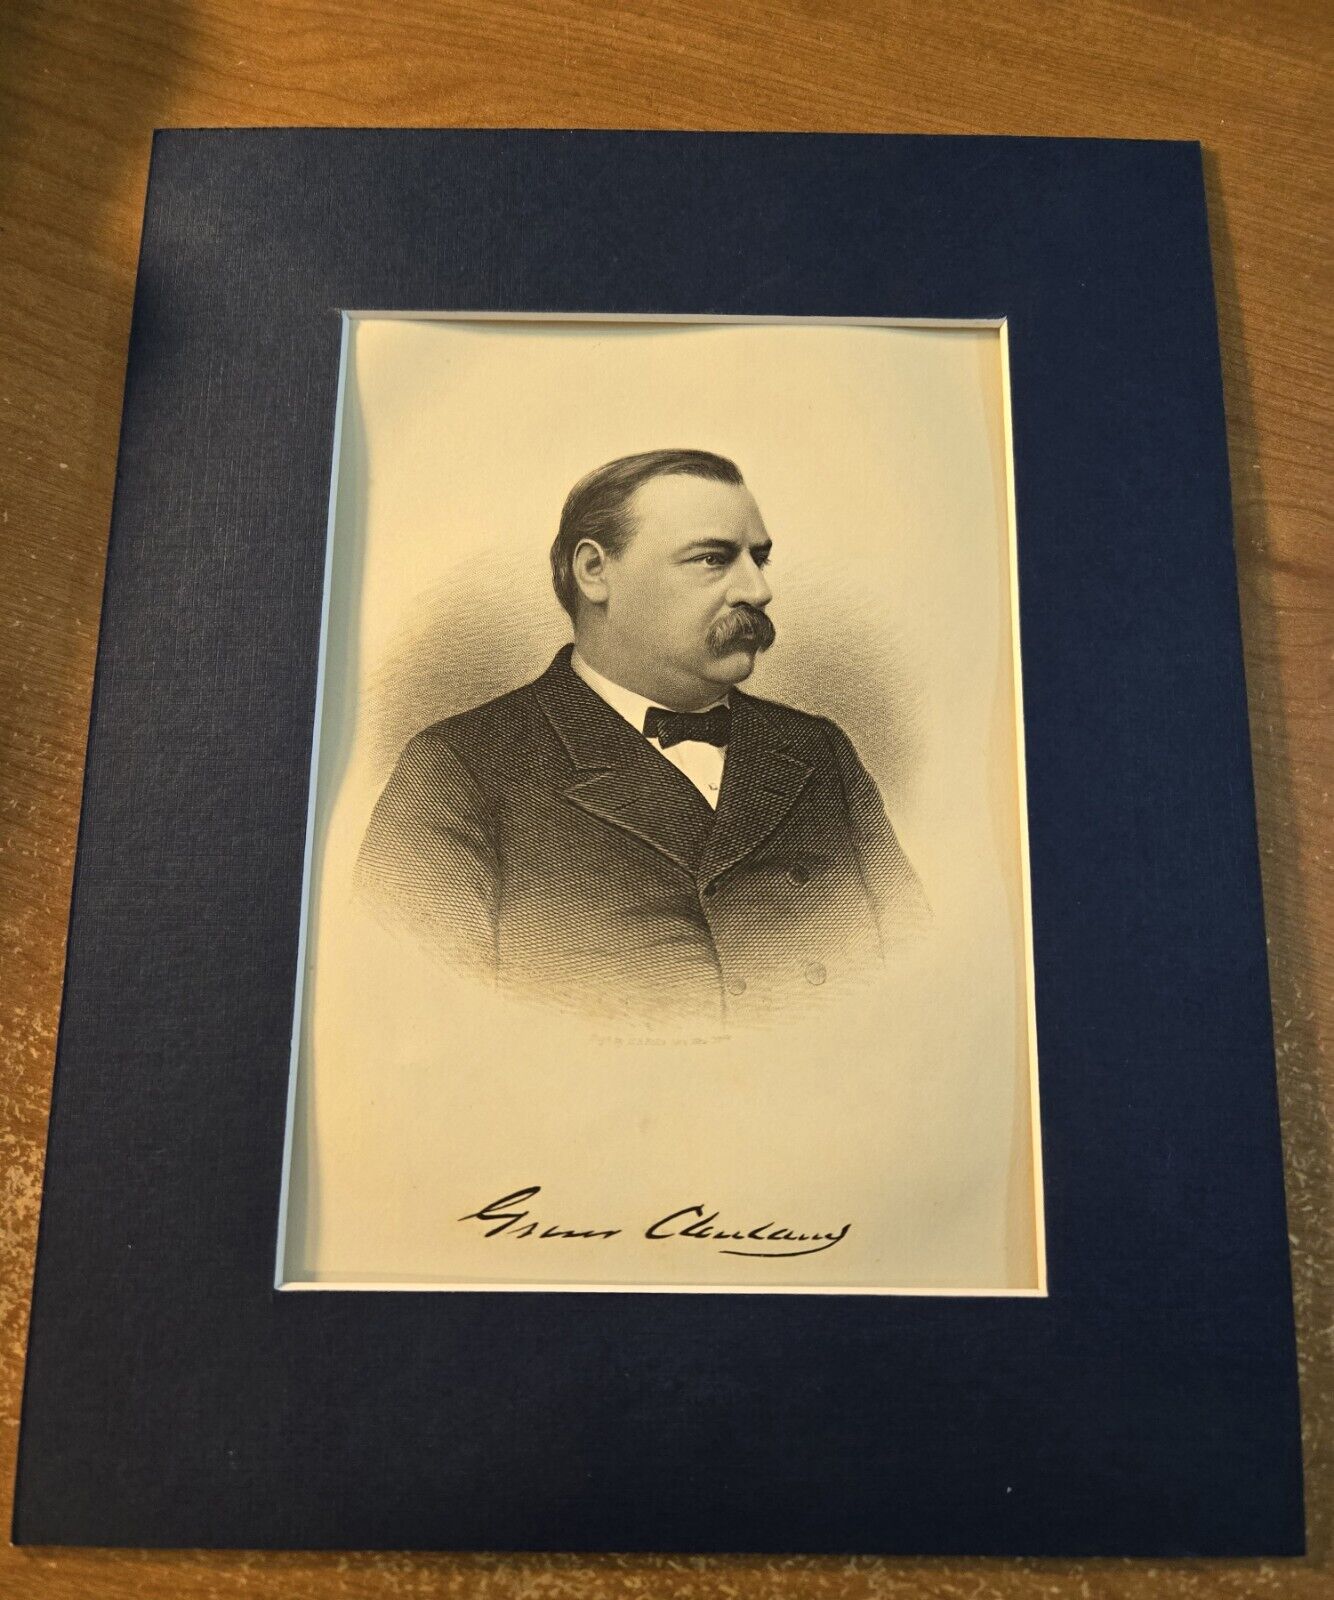 Grover Cleveland - Authentic 1889 Steel Engraving w/Signature - Matted